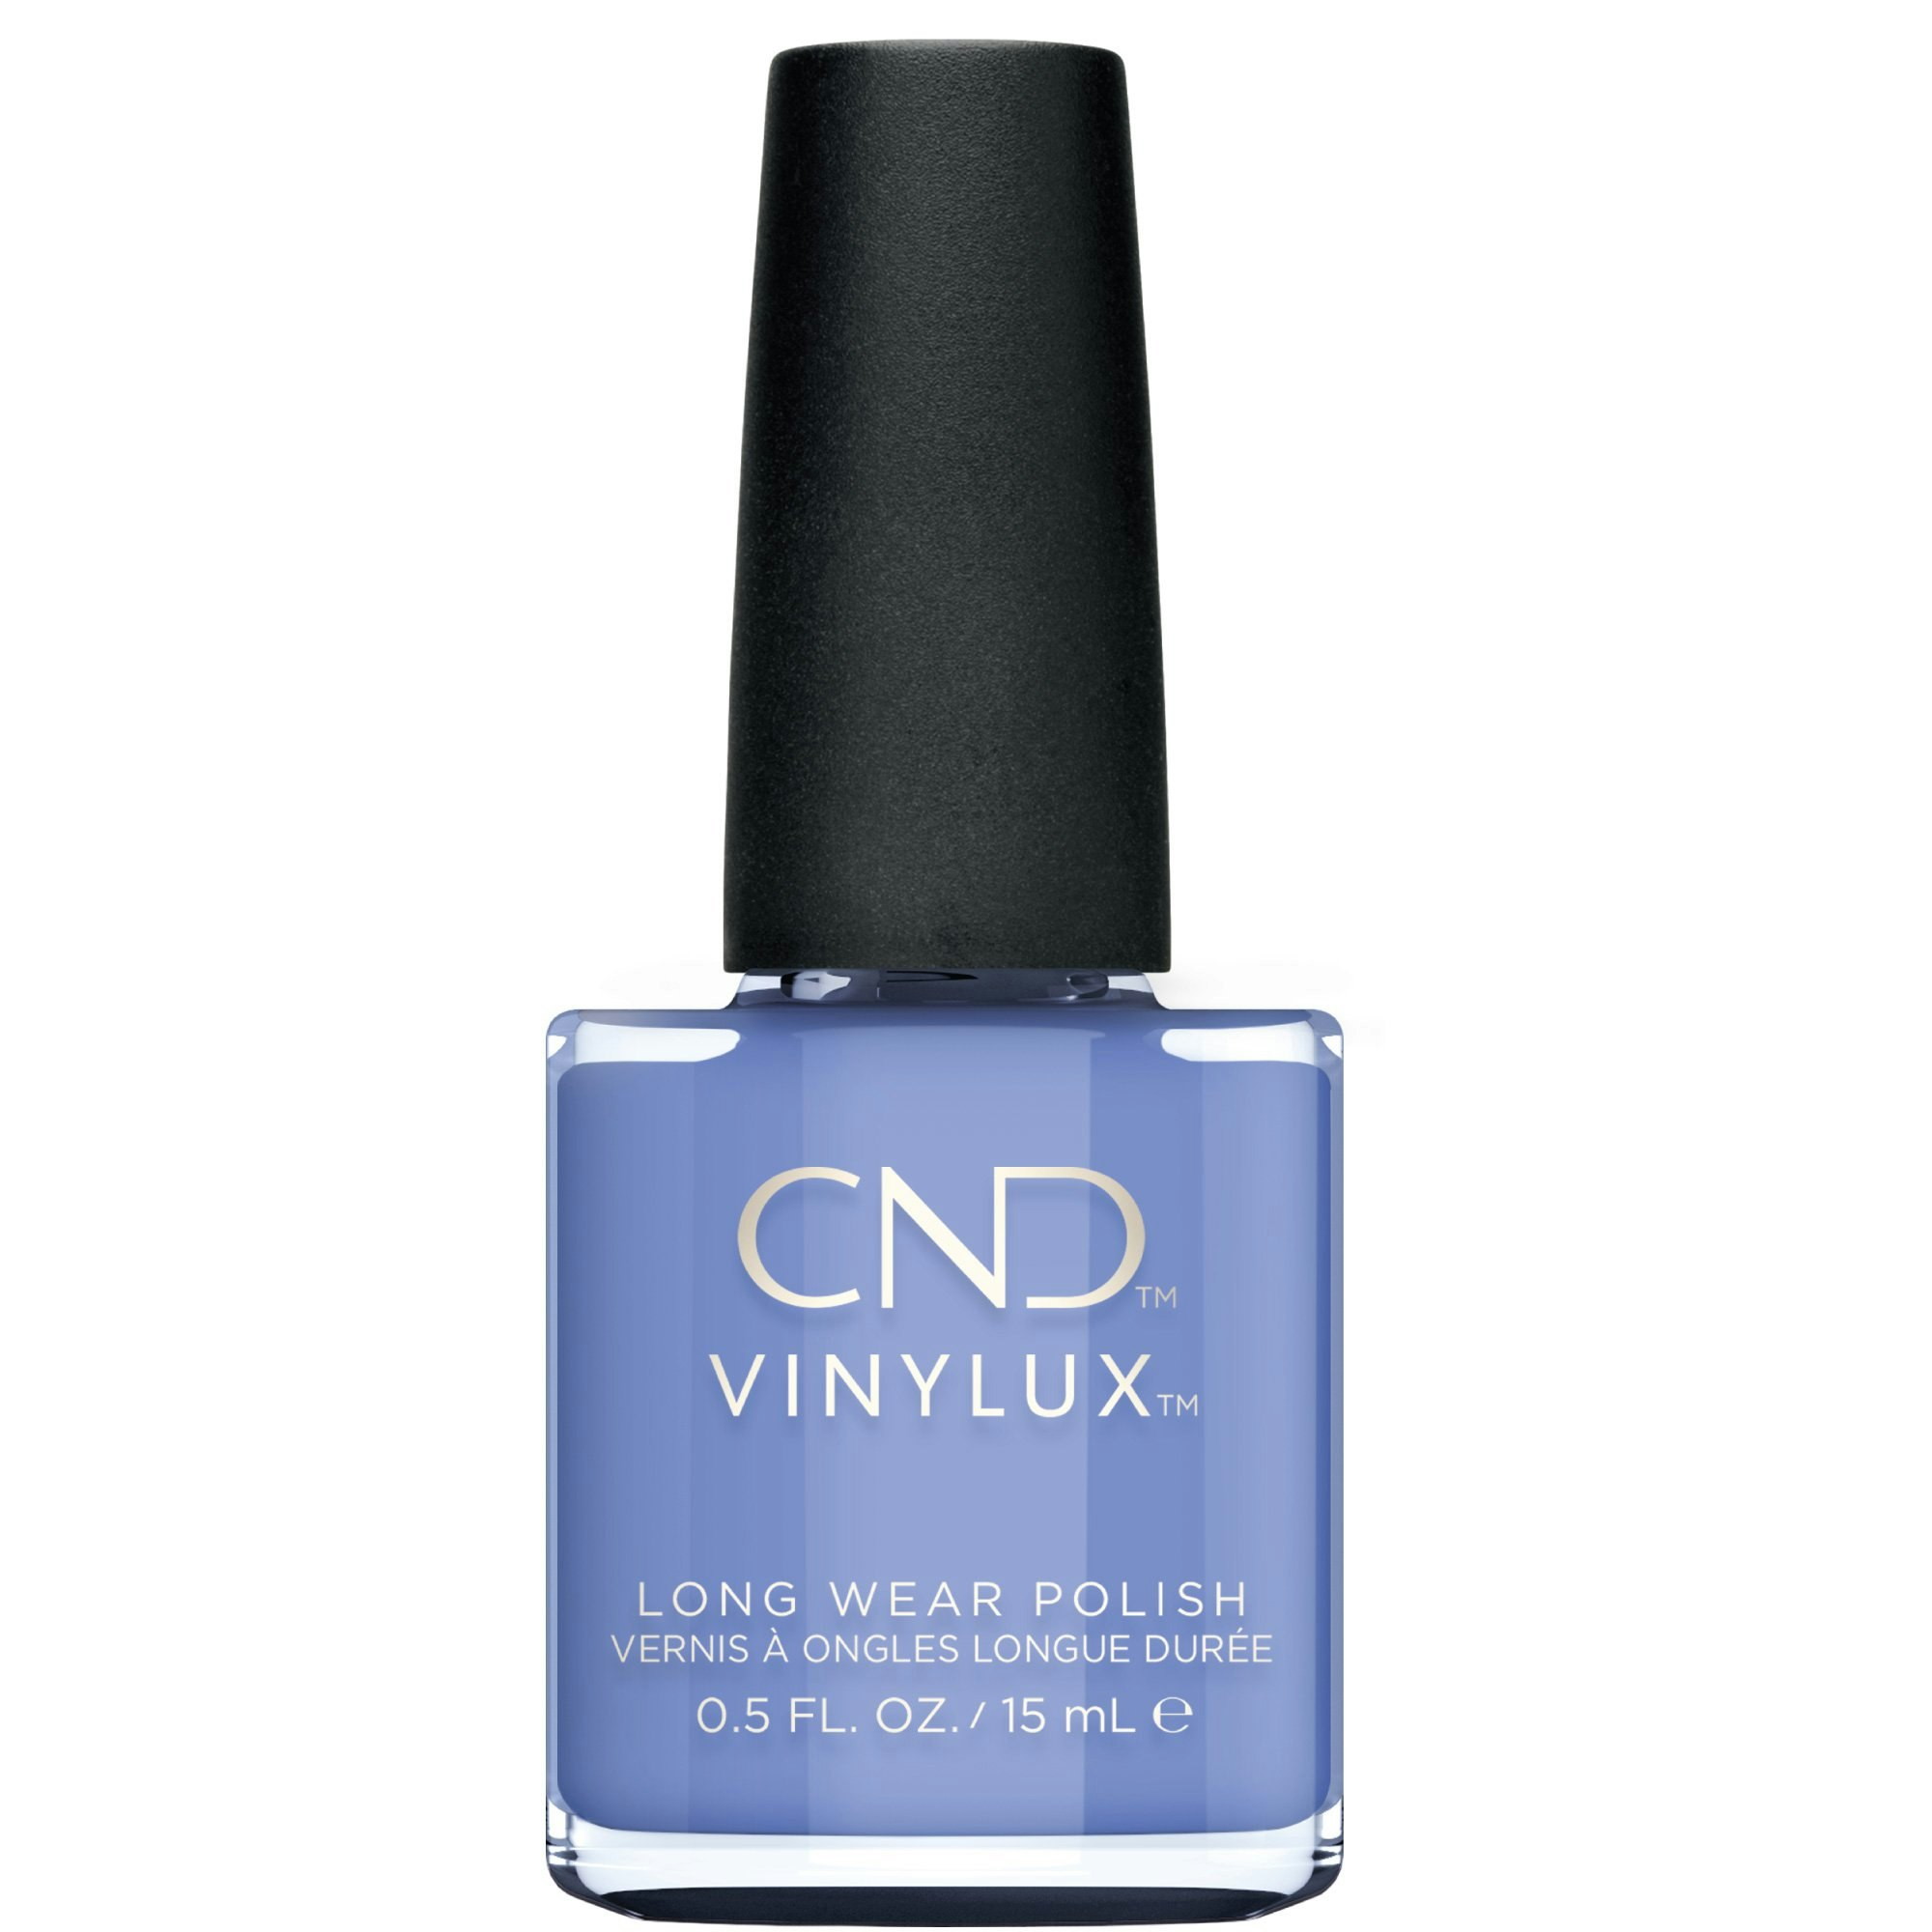 CND Down by the bae #357 VINYLUX, 15 ml